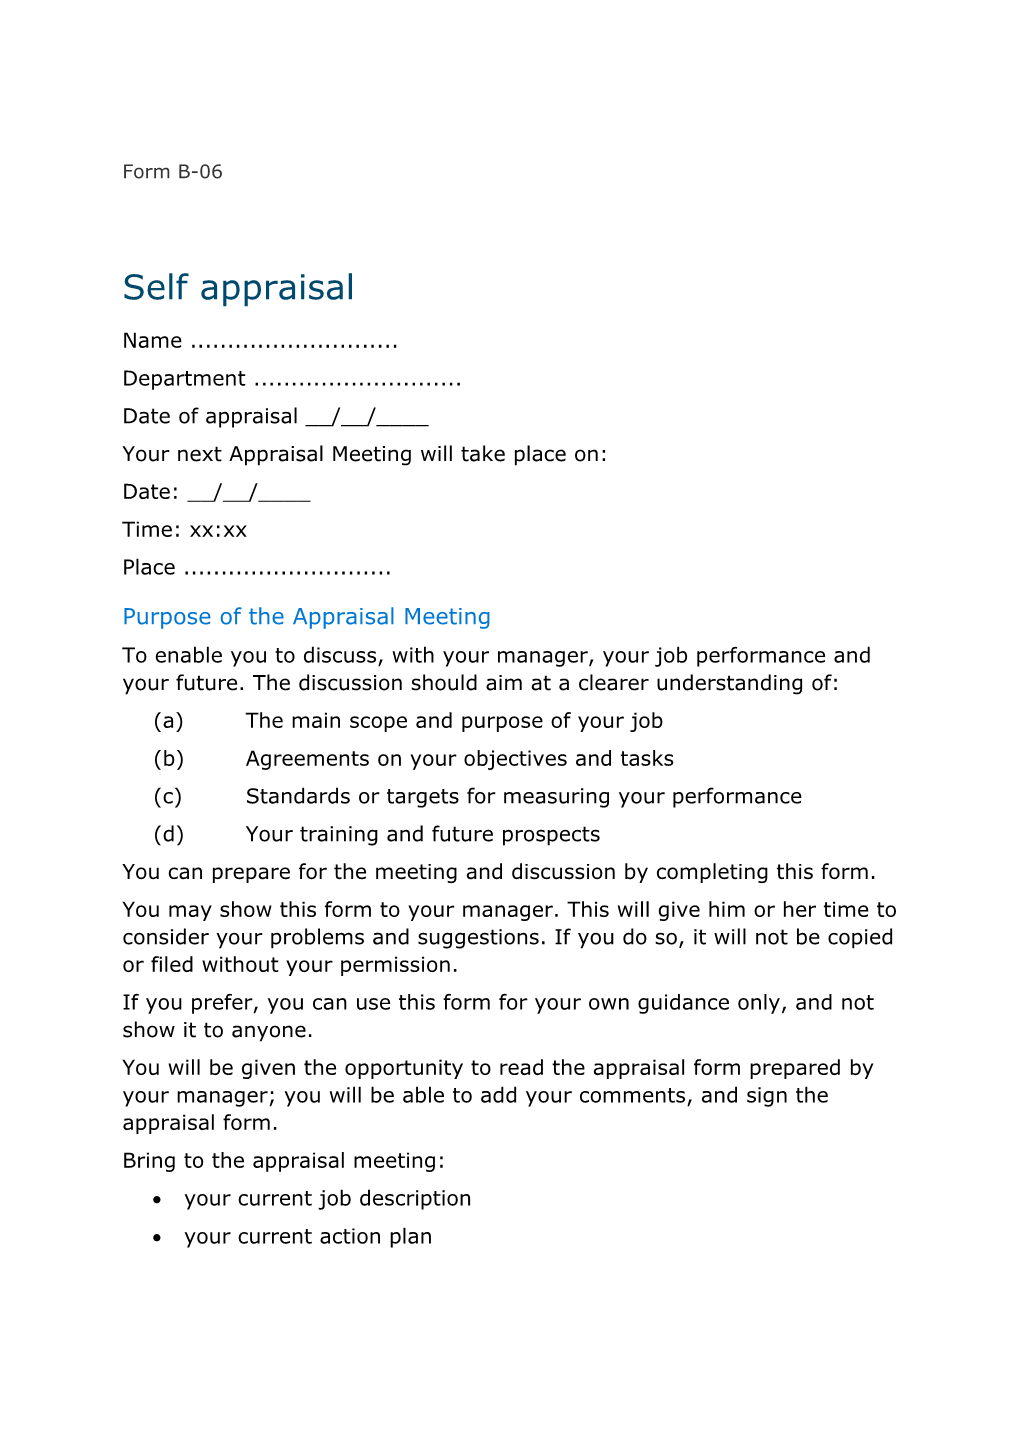 Your Next Appraisal Meeting Will Take Place On